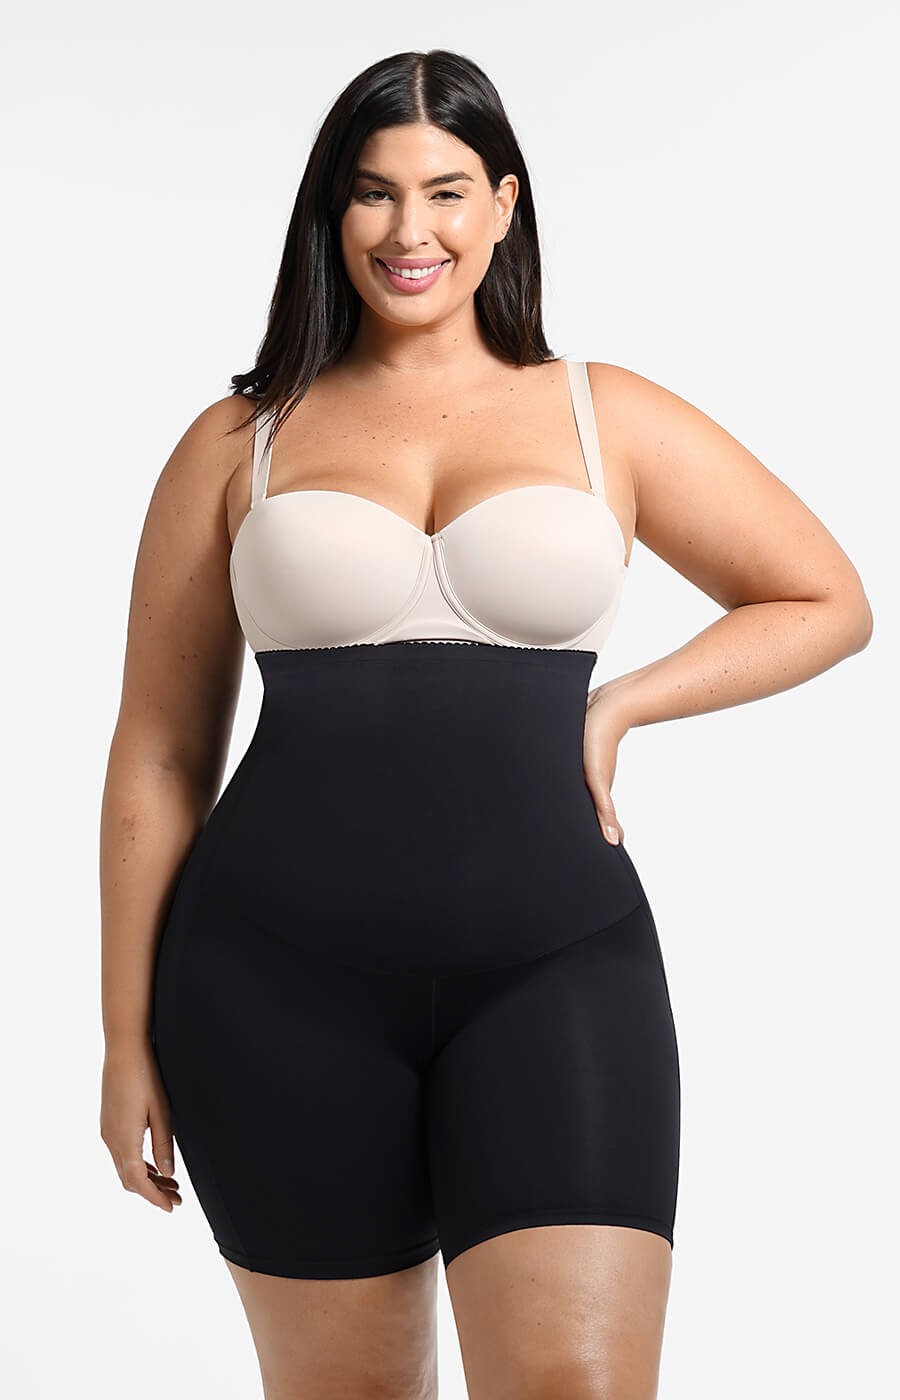 Enhance Your Outfit Instantly with Shapellx Shapewear - Analisa Muya